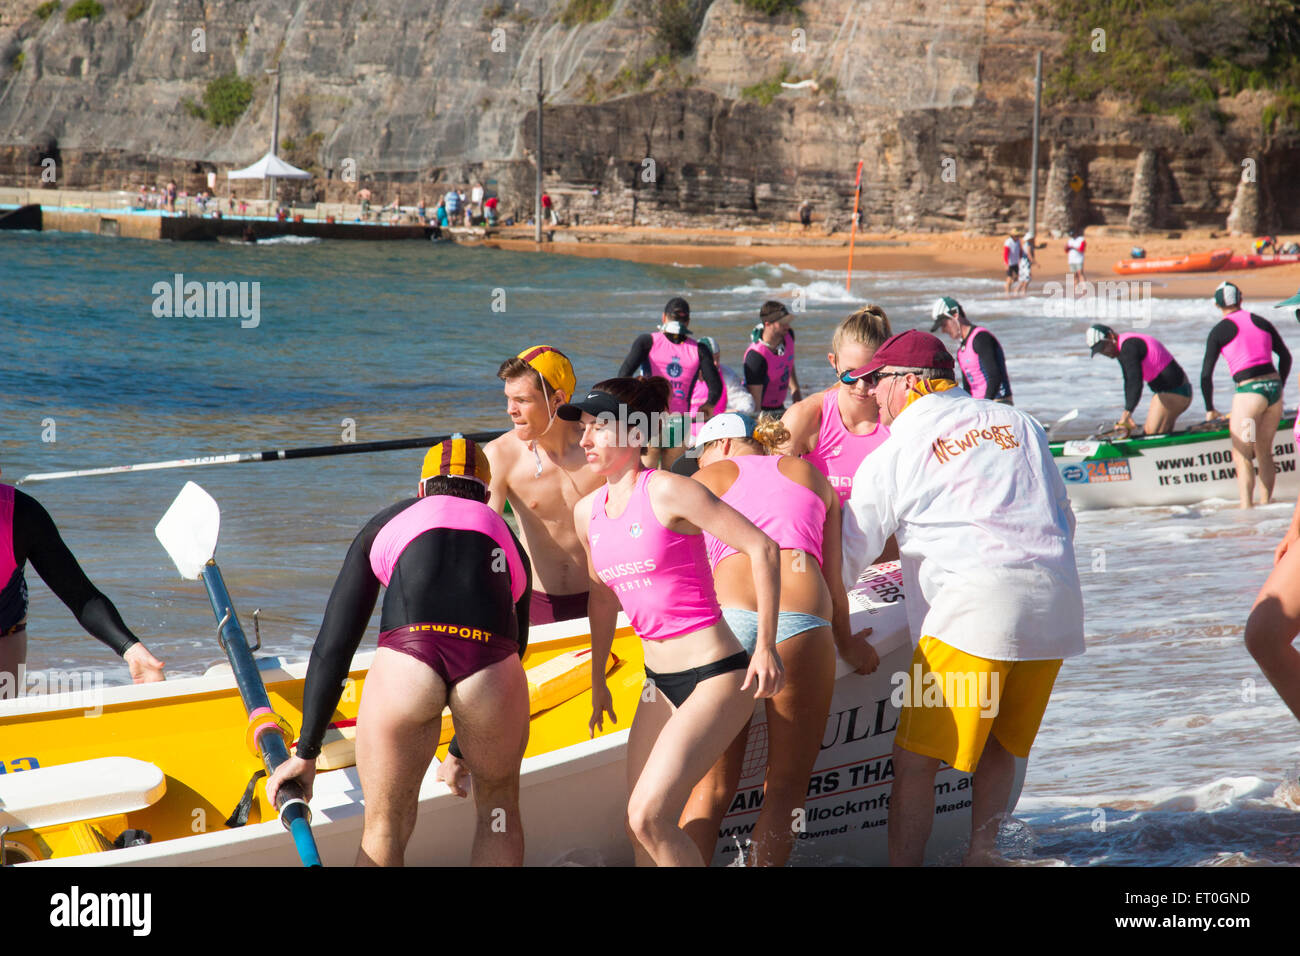 Summer surfboat racing competition amongst surfclubs located on Sydney's northern beaches begins at Bilgola Beach. australia. Stock Photo